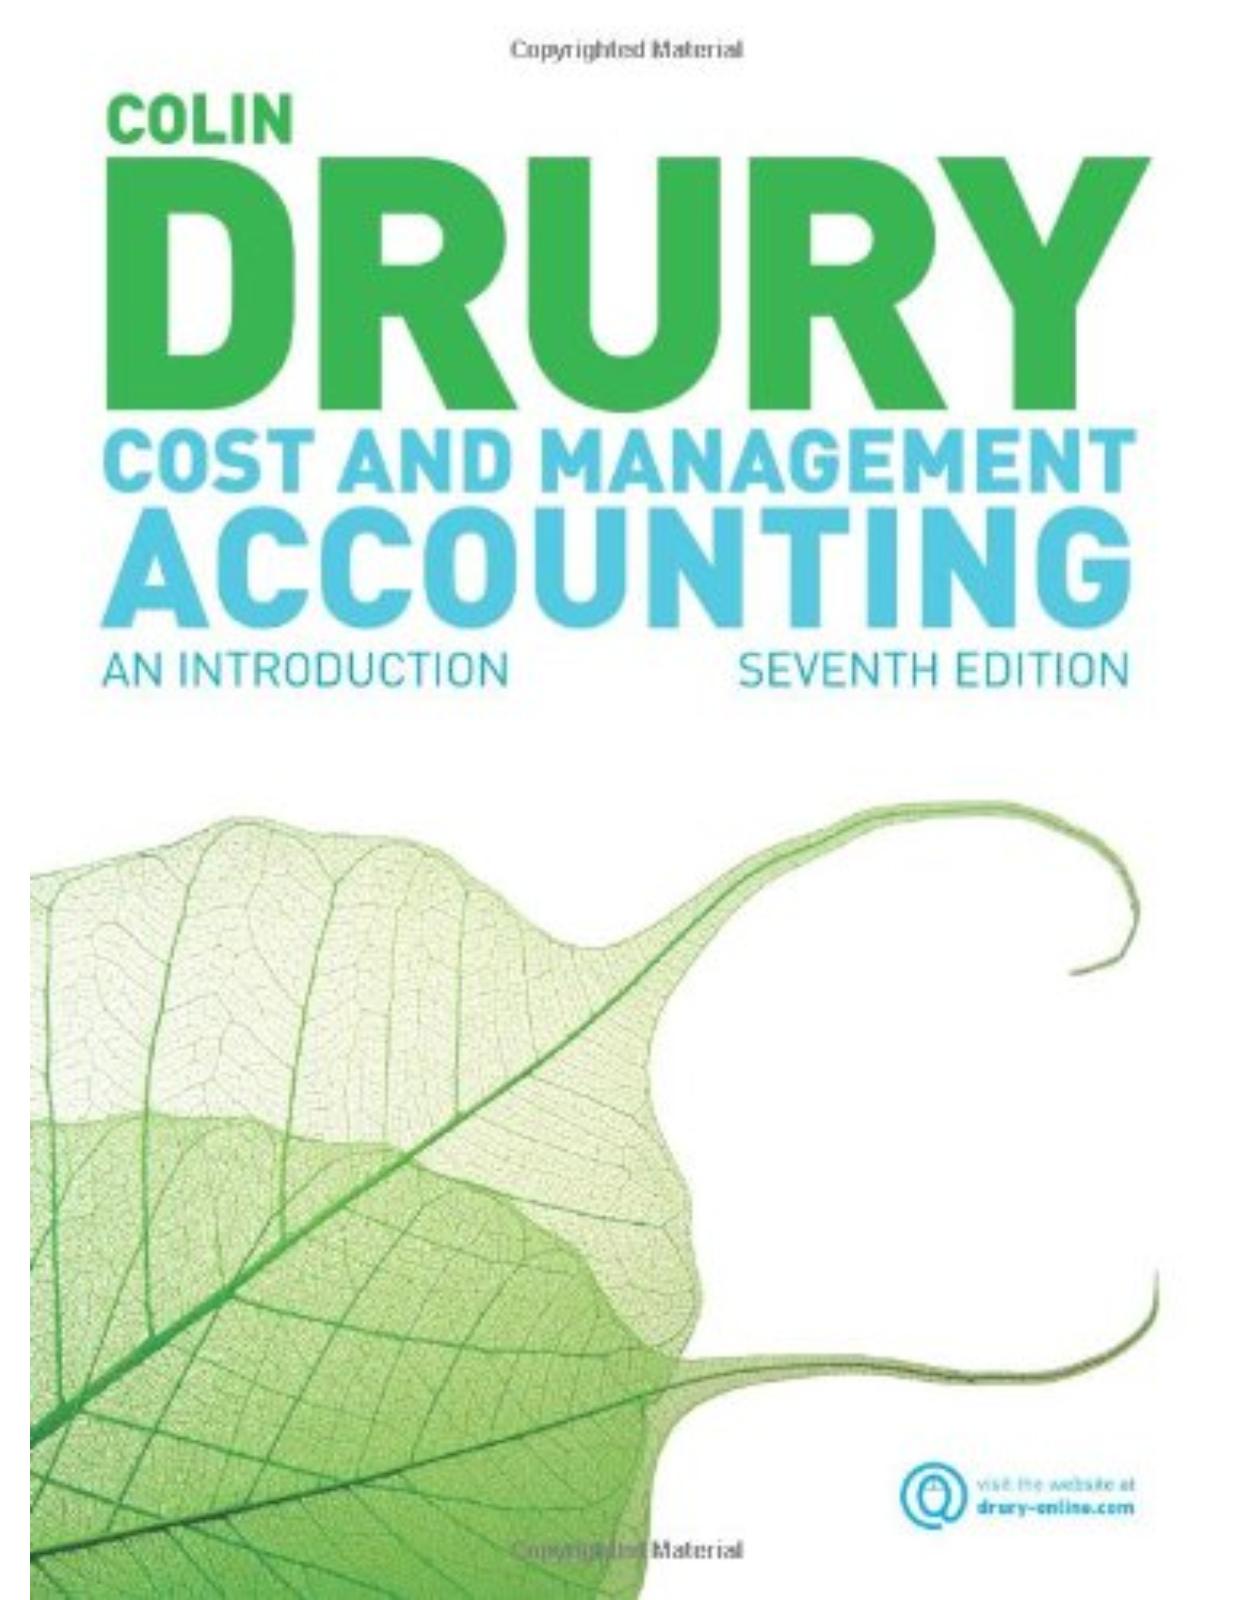 Cost and Management Accounting 7e